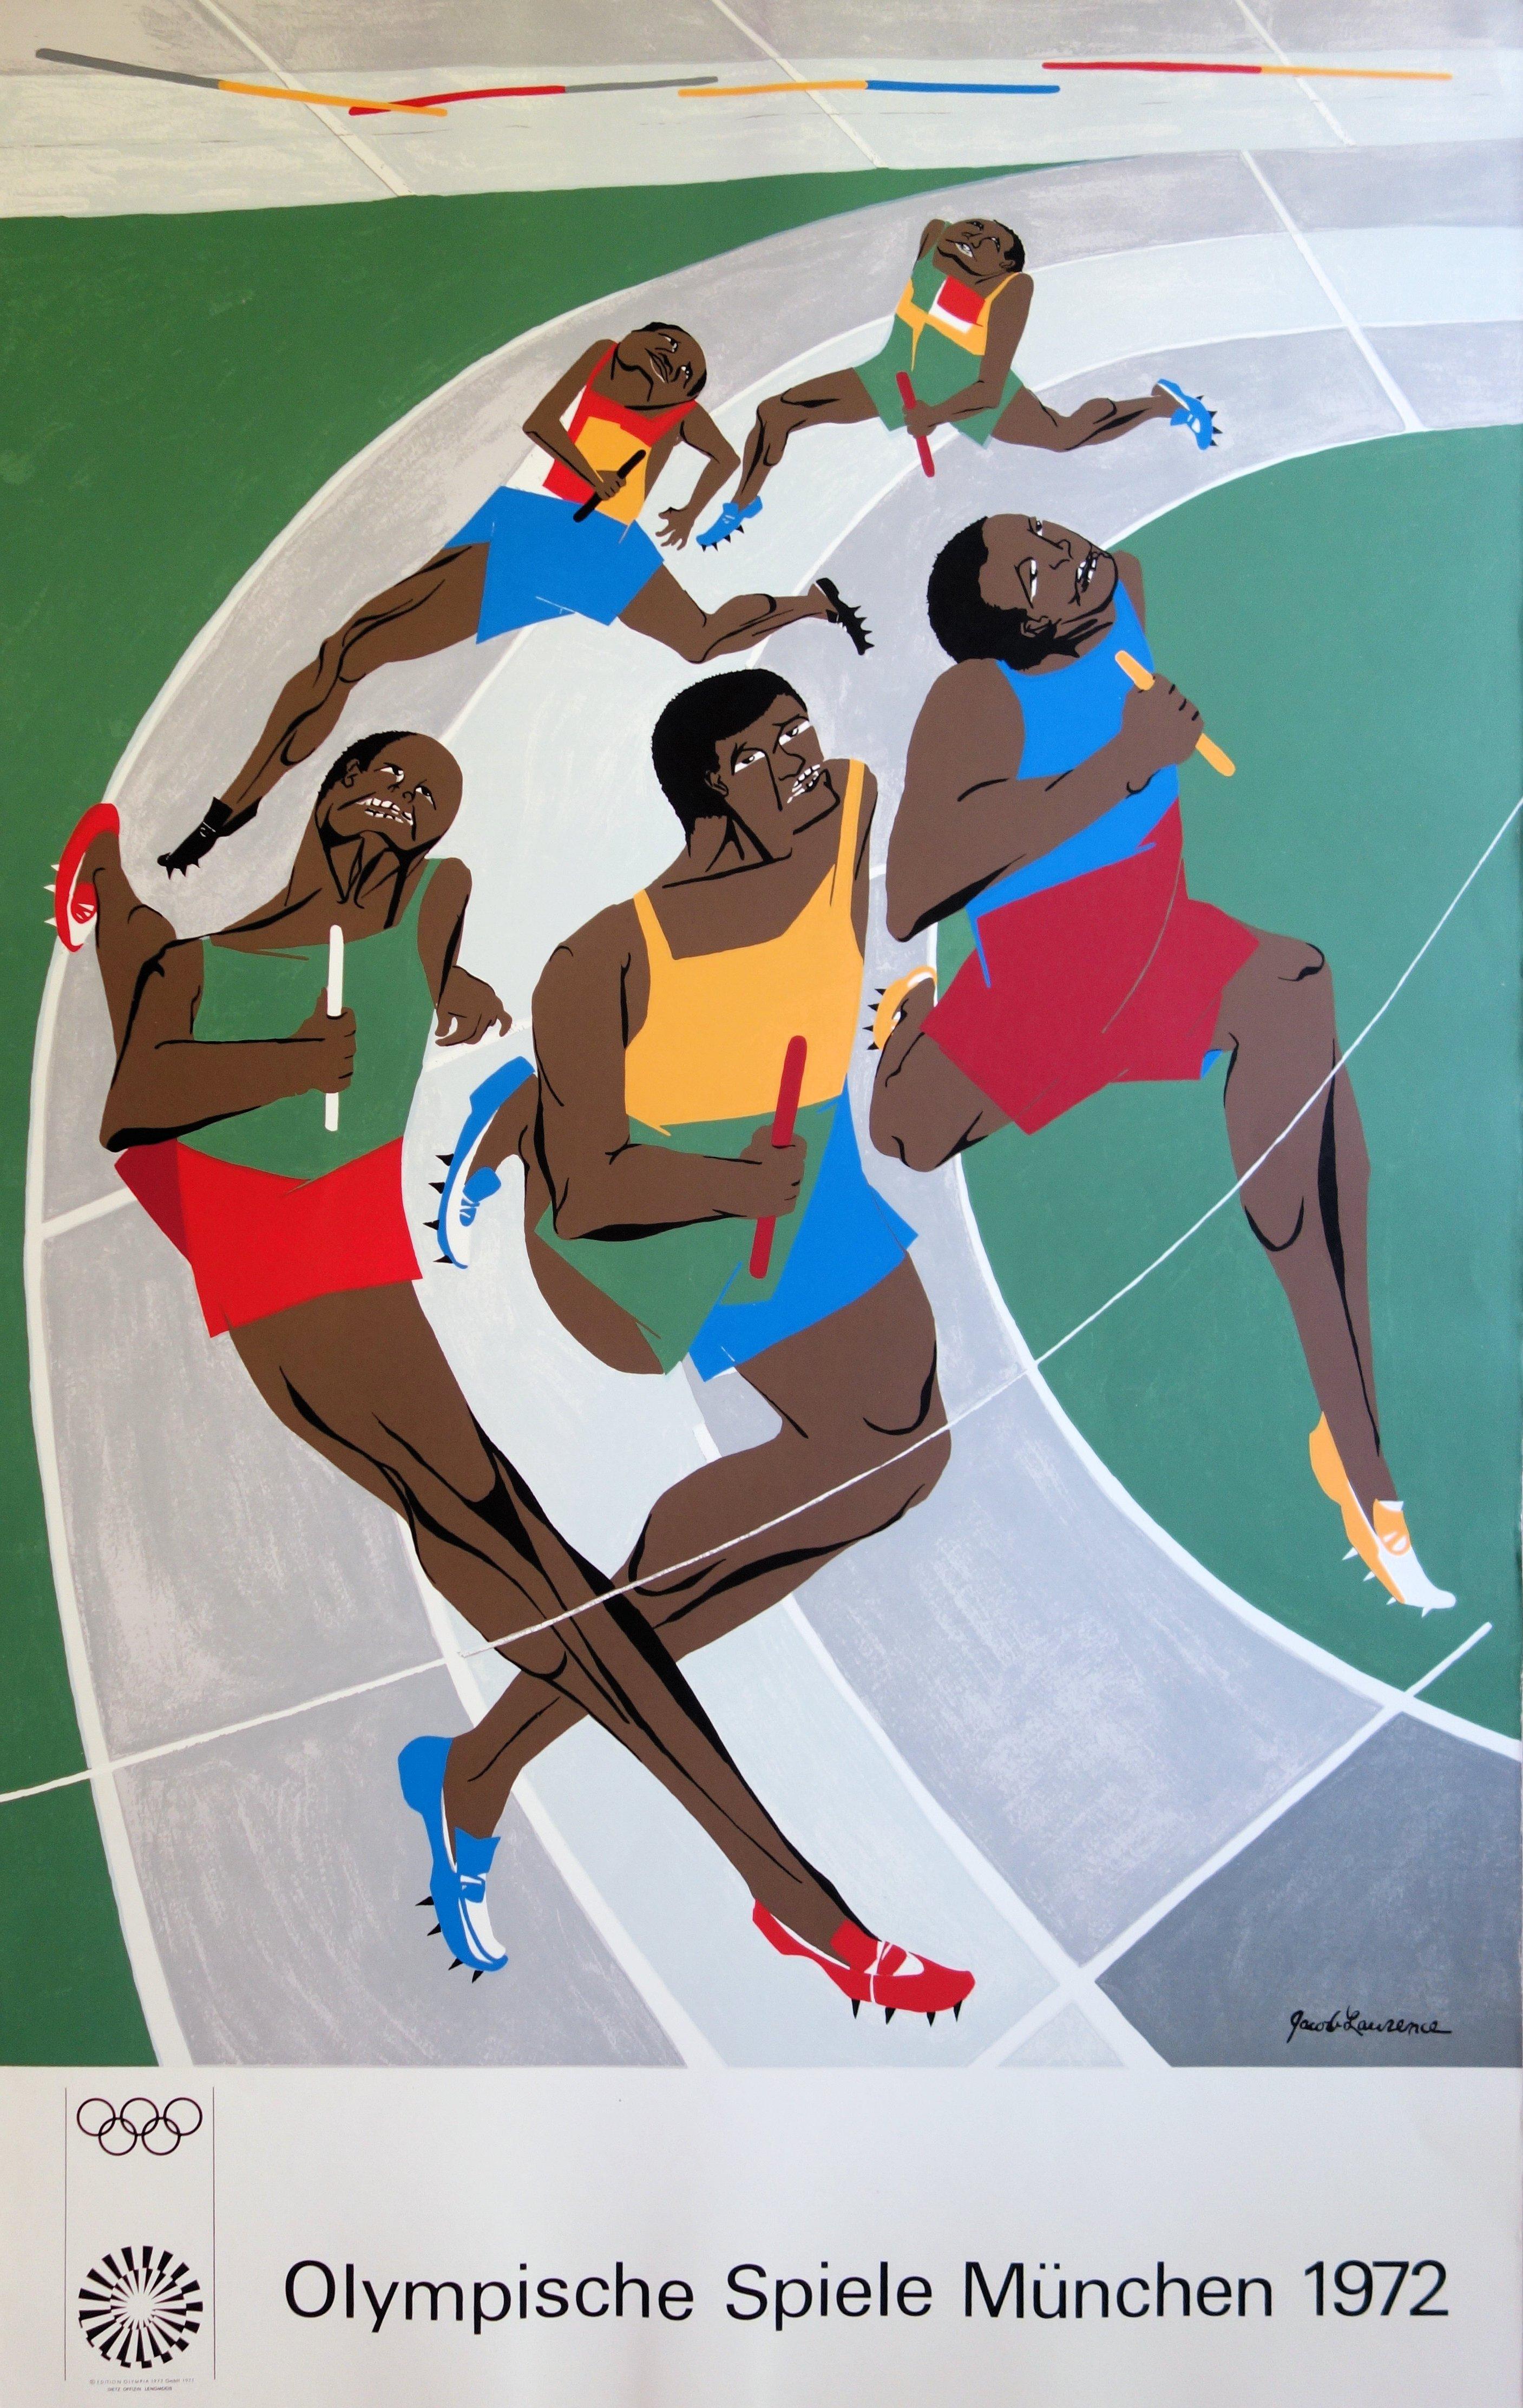 Abstract Print Jacob Lawrence - The Relay Race : Passing the Baton - Lithographie (Olympic Games Munich 1972)